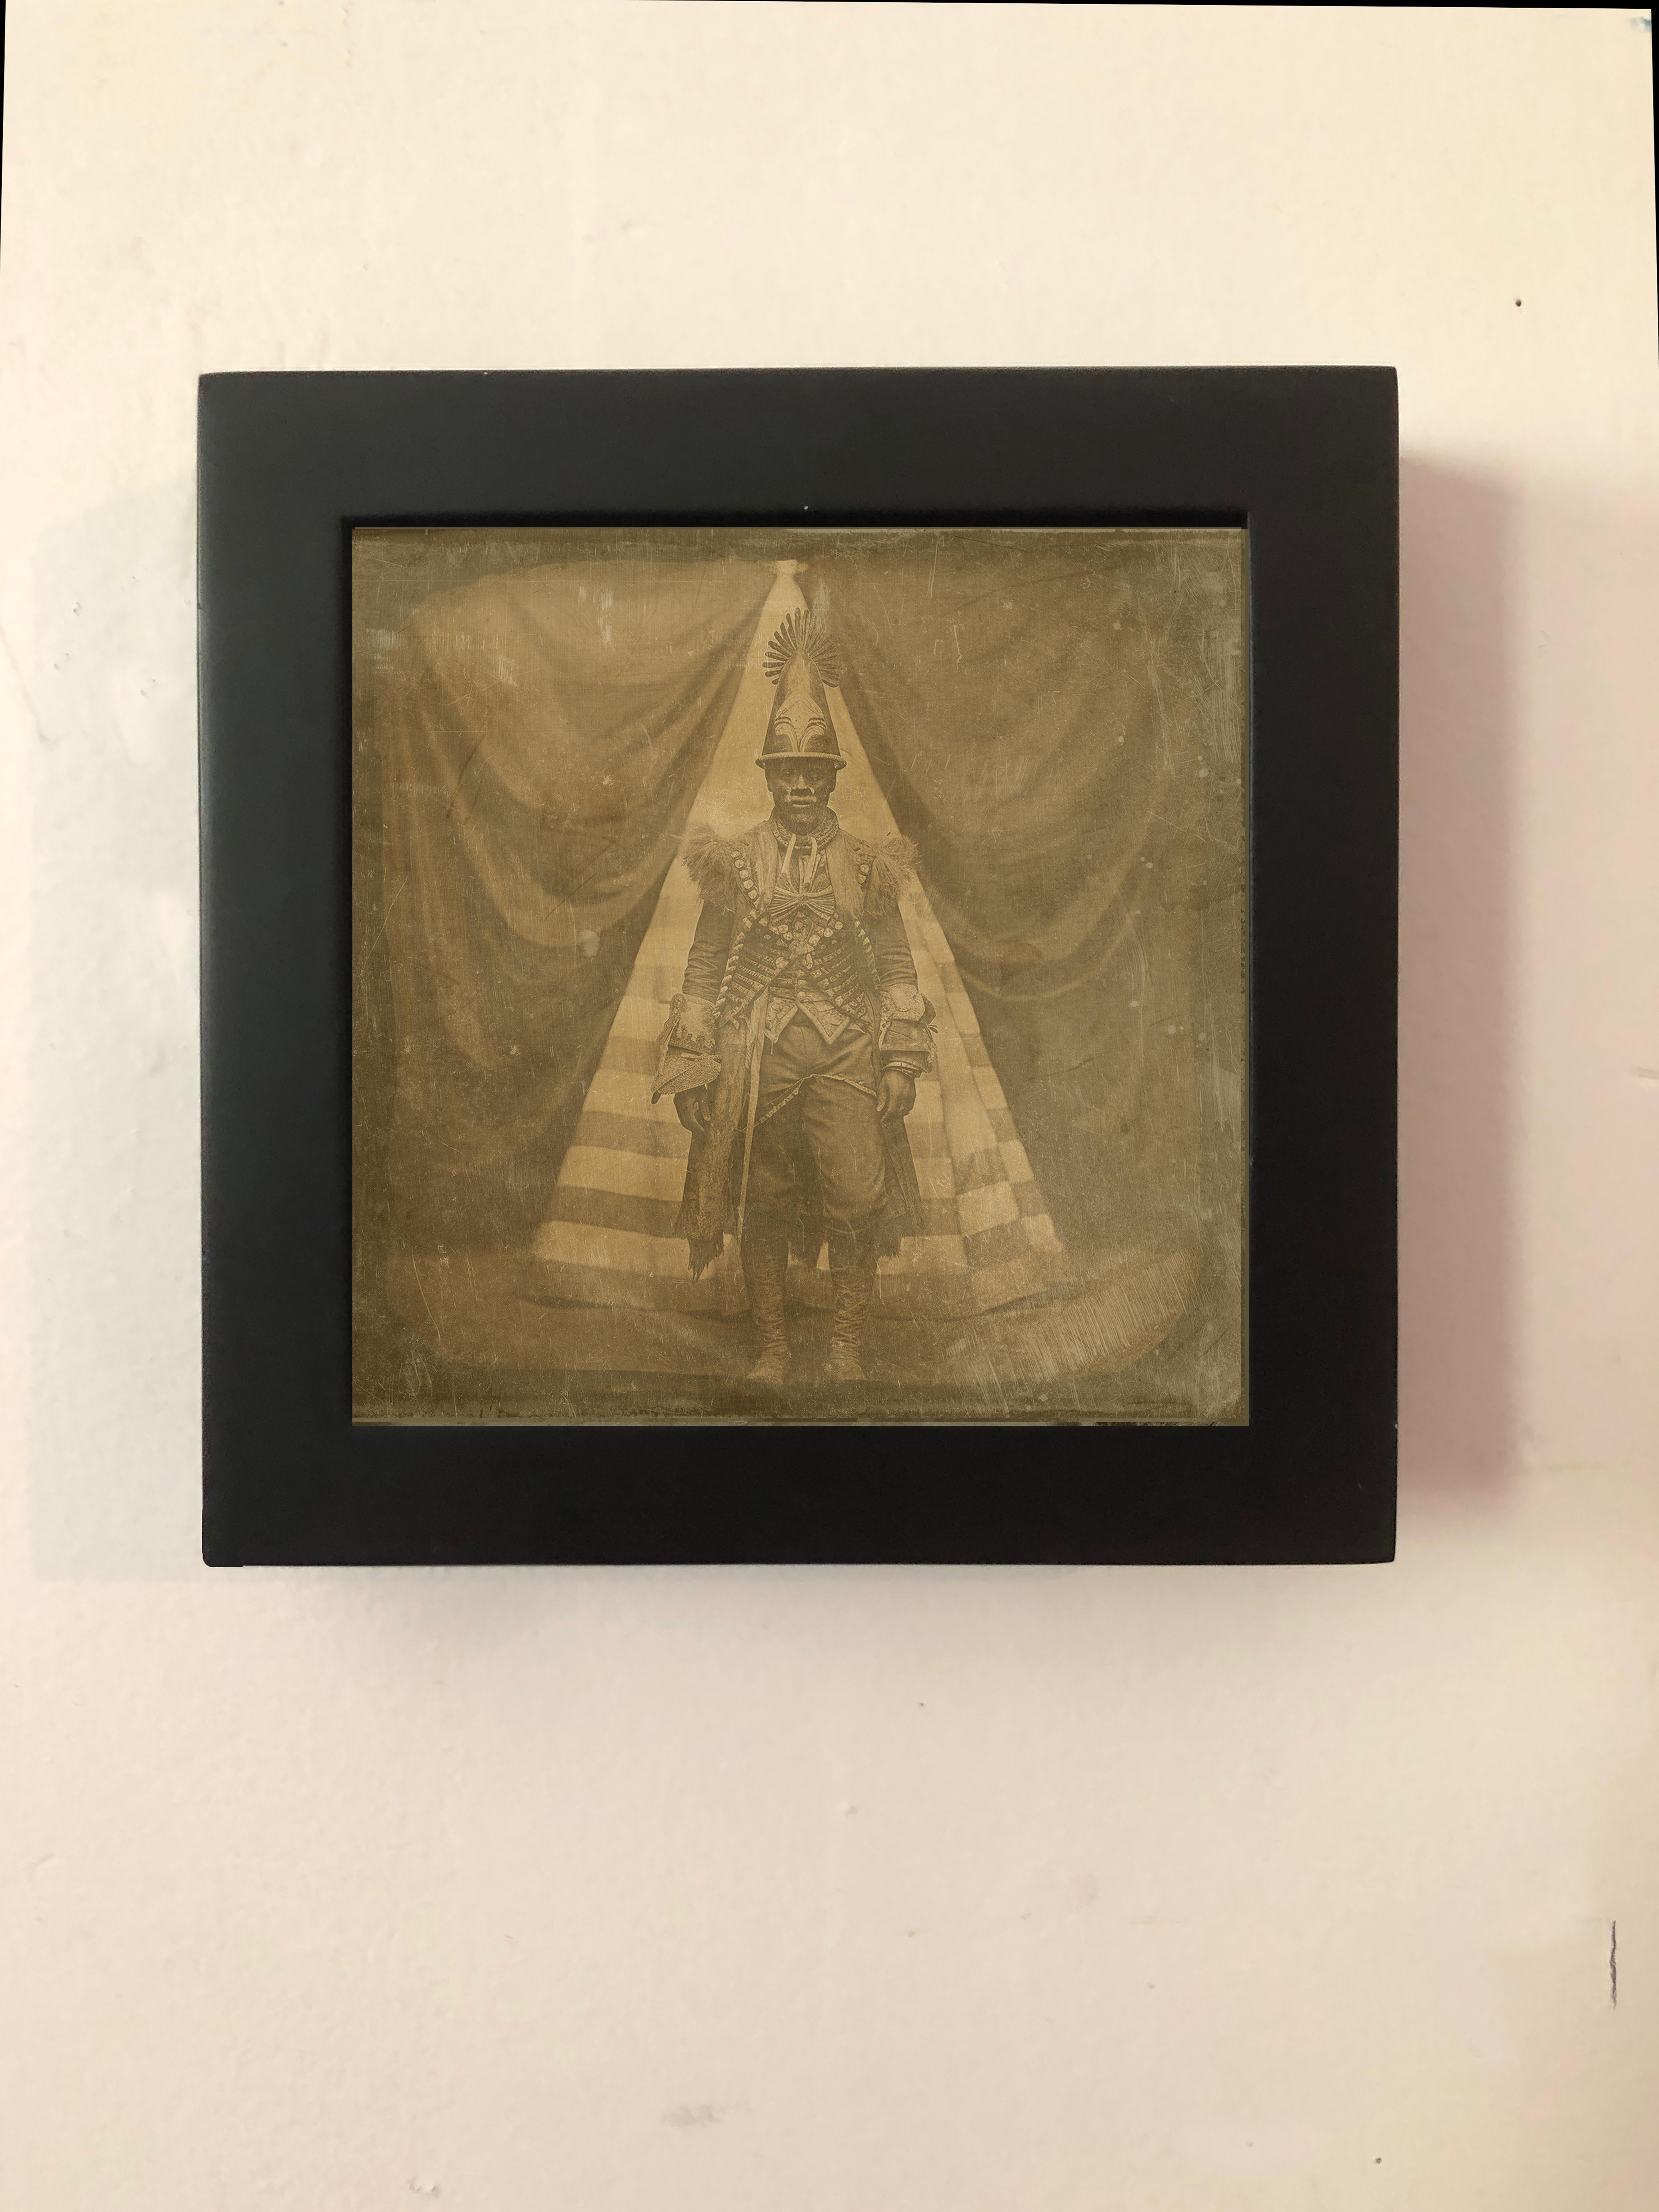 The Nubian Prince -exotic daguerreotype reproduction Framed - Photograph by FPA Francis Pavy Artist